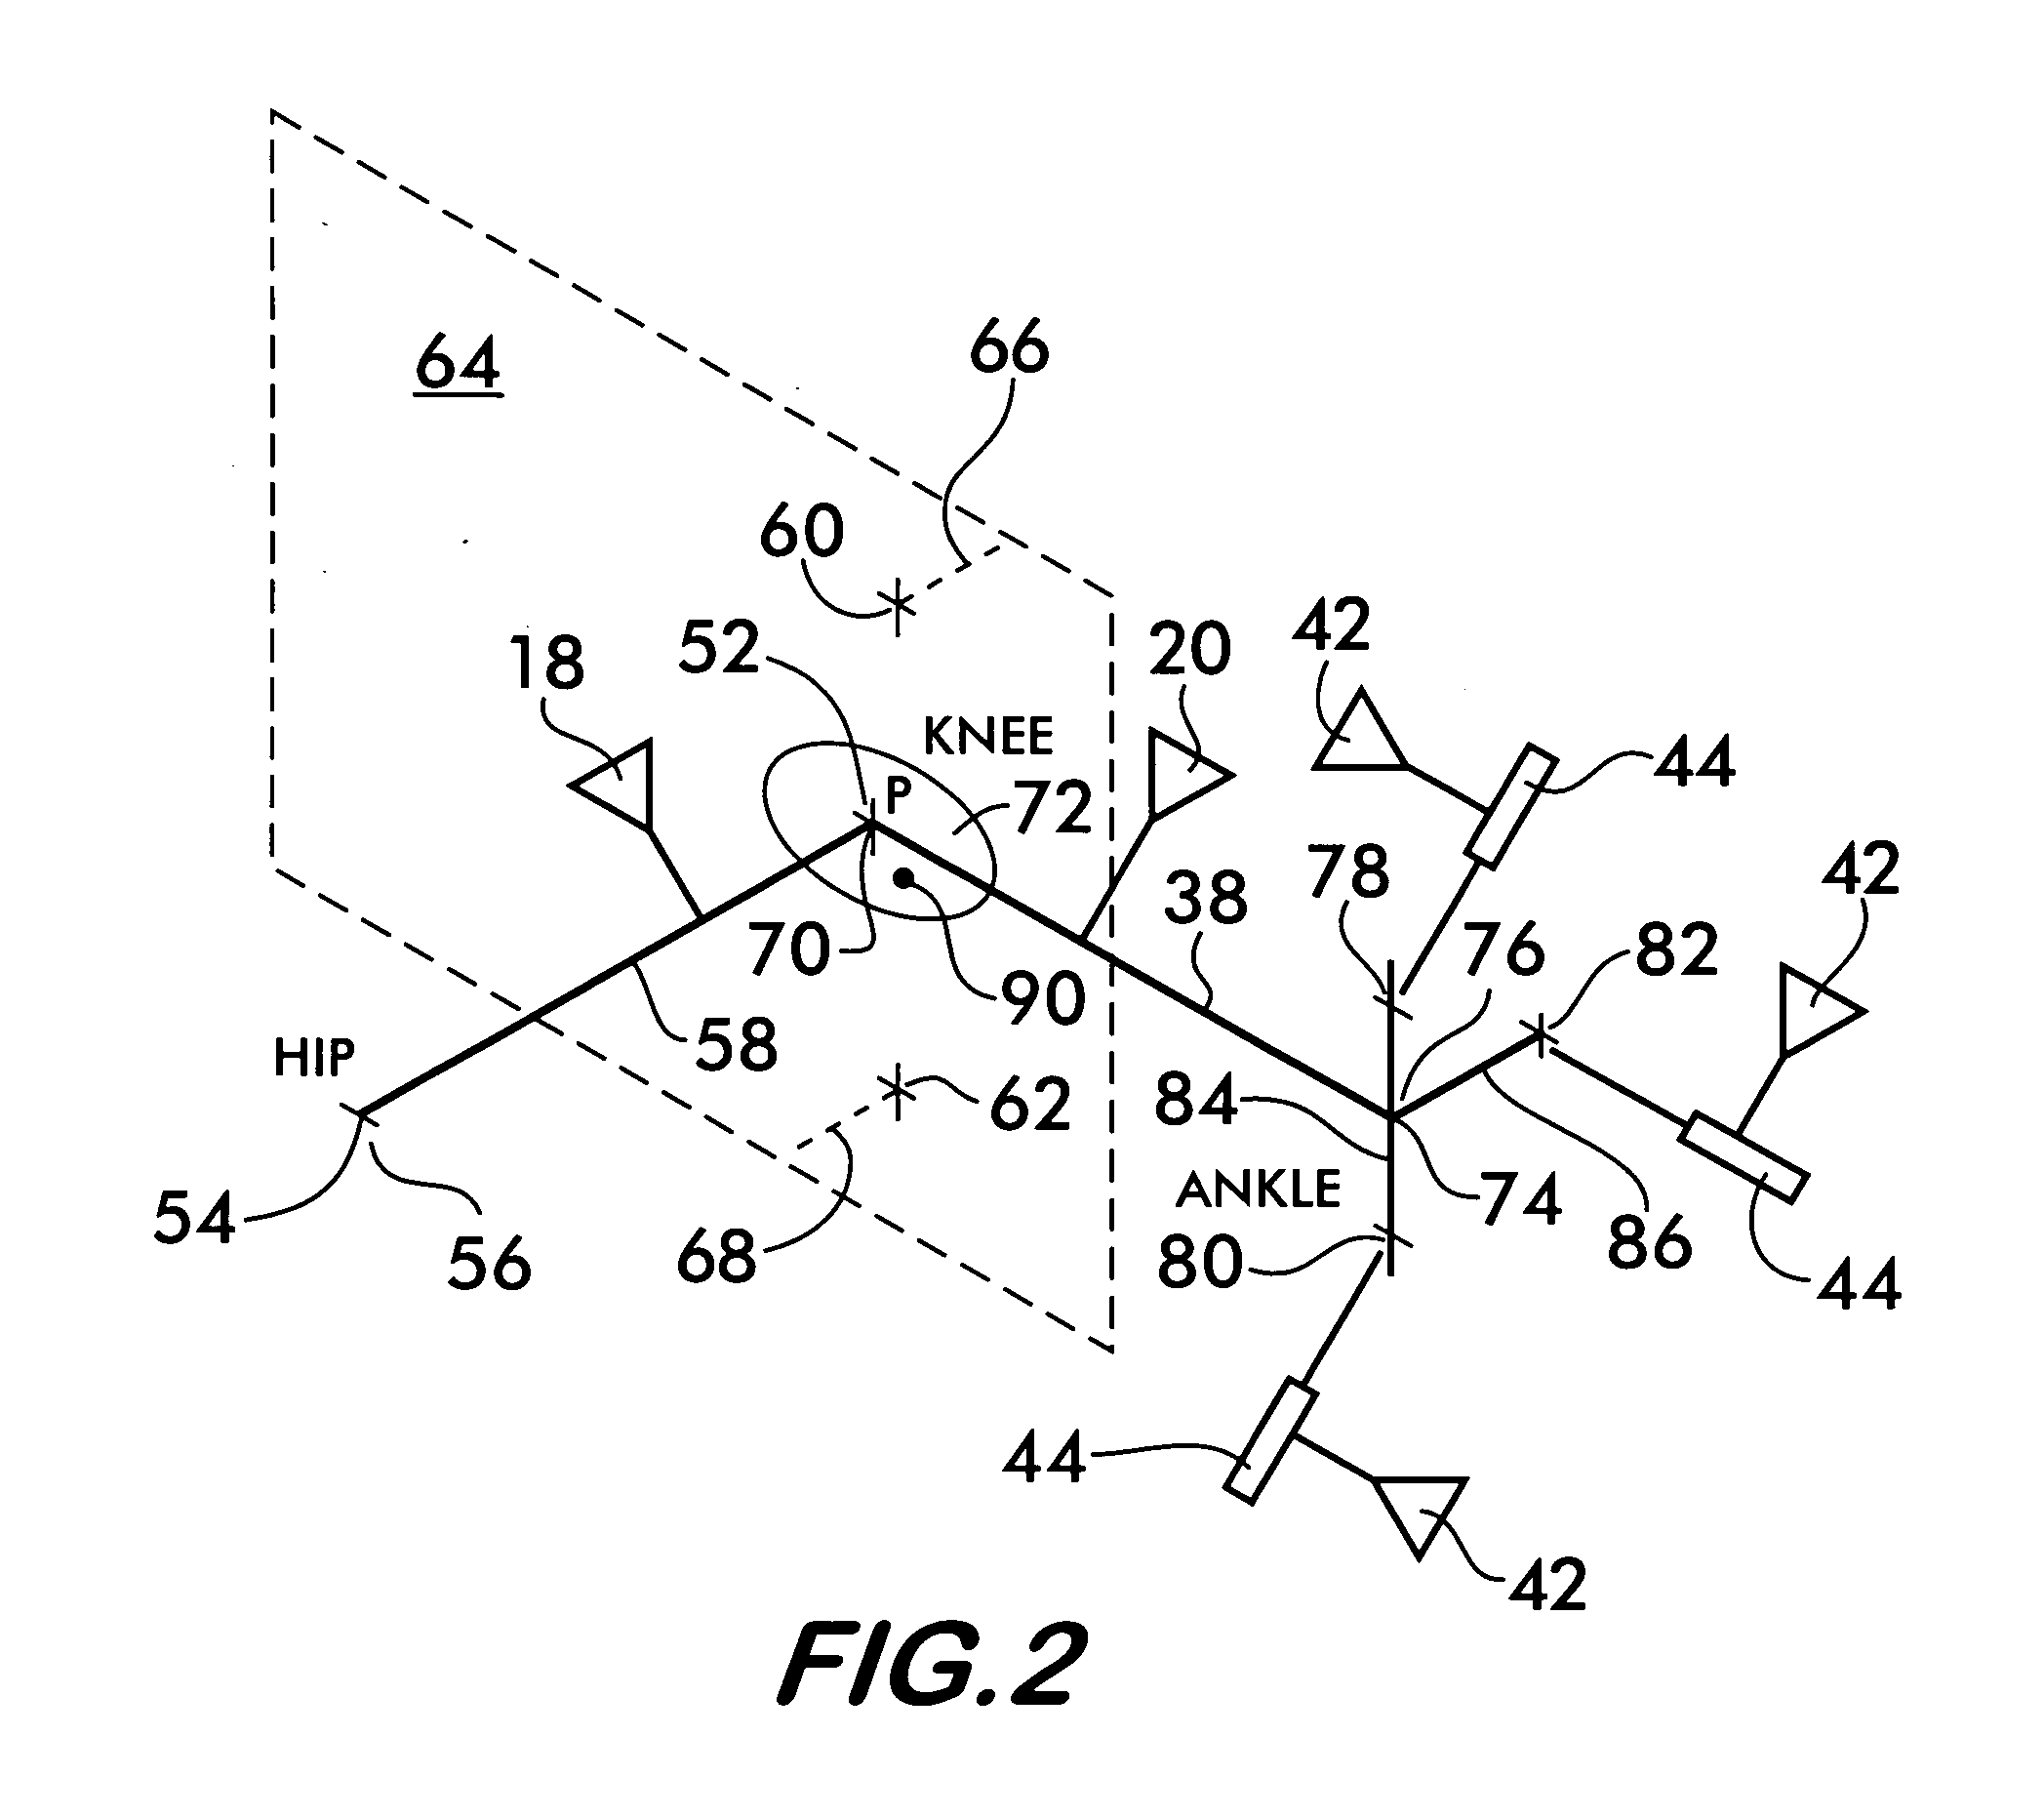 Method of determining the position of the articular point of a joint